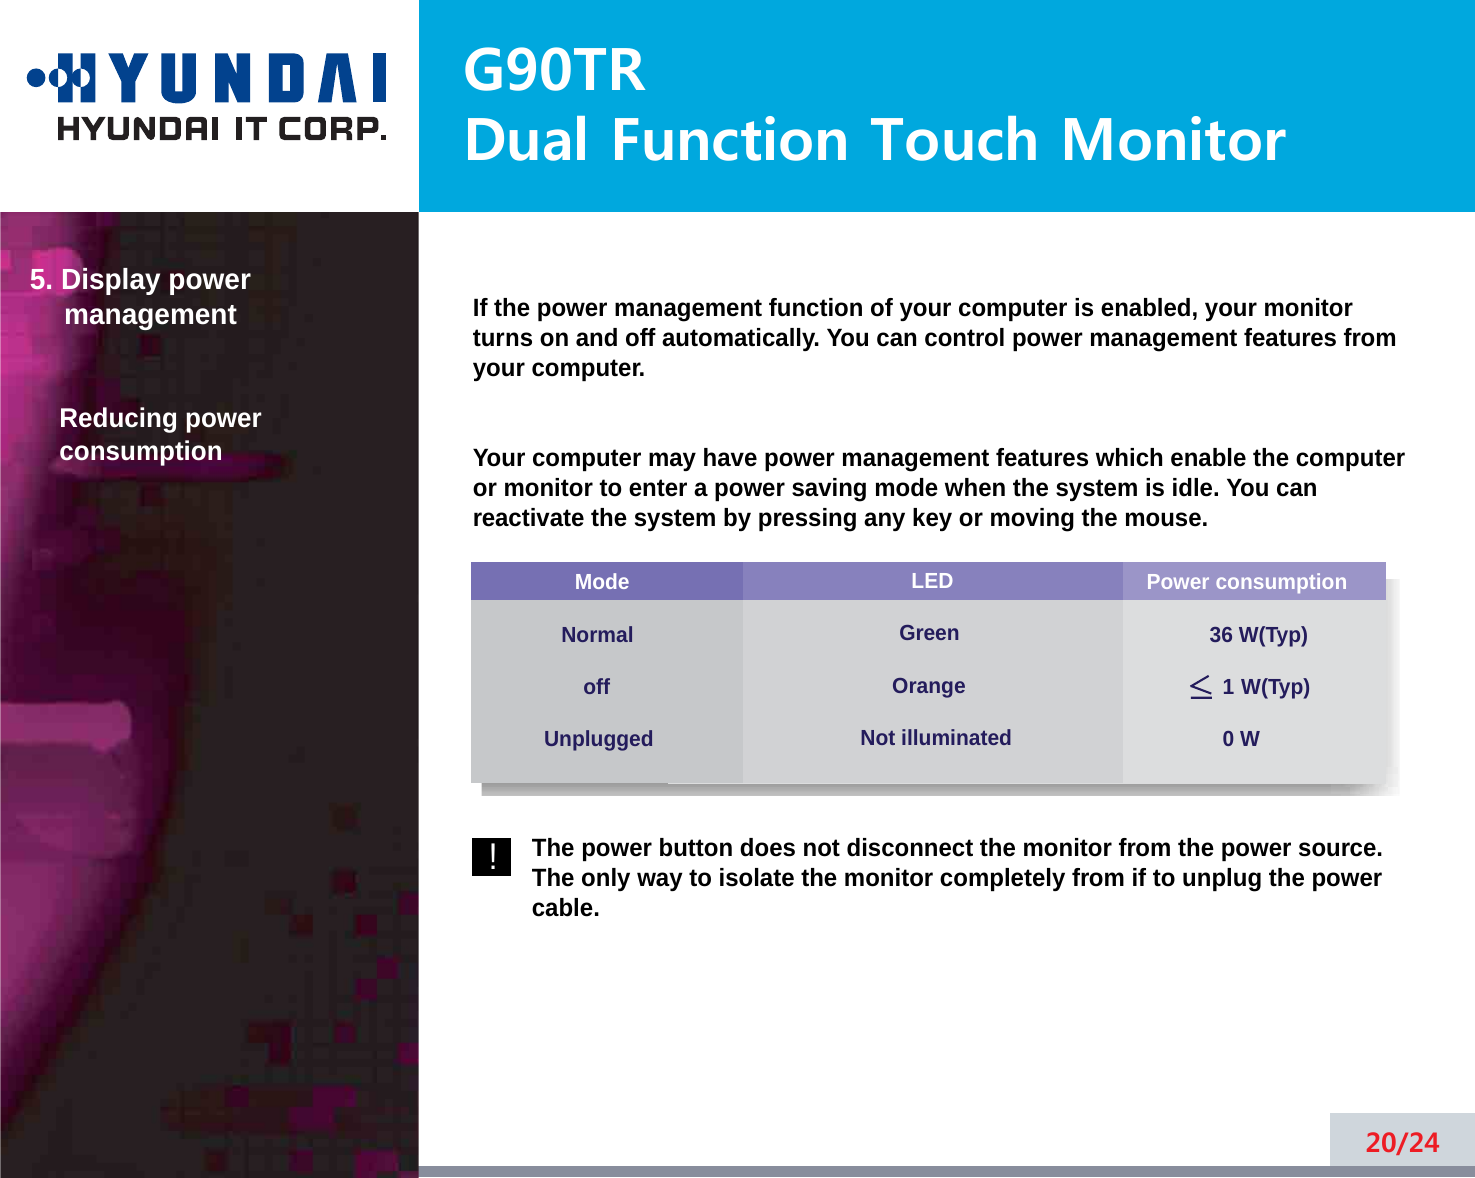 G90TRDual Function Touch MonitorIf the power management function of your computer is enabled, your monitorturns on and off automatically. You can control power management features fromyour computer.Your computer may have power management features which enable the computeror monitor to enter a power saving mode when the system is idle. You canreactivate the system by pressing any key or moving the mouse.The power button does not disconnect the monitor from the power source.The only way to isolate the monitor completely from if to unplug the powercable.20/245. Display power managementReducing powerconsumptionPower consumption36 W(Typ)1 W(Typ)0 WModeNormaloffUnpluggedLEDGreenOrangeNot illuminated!